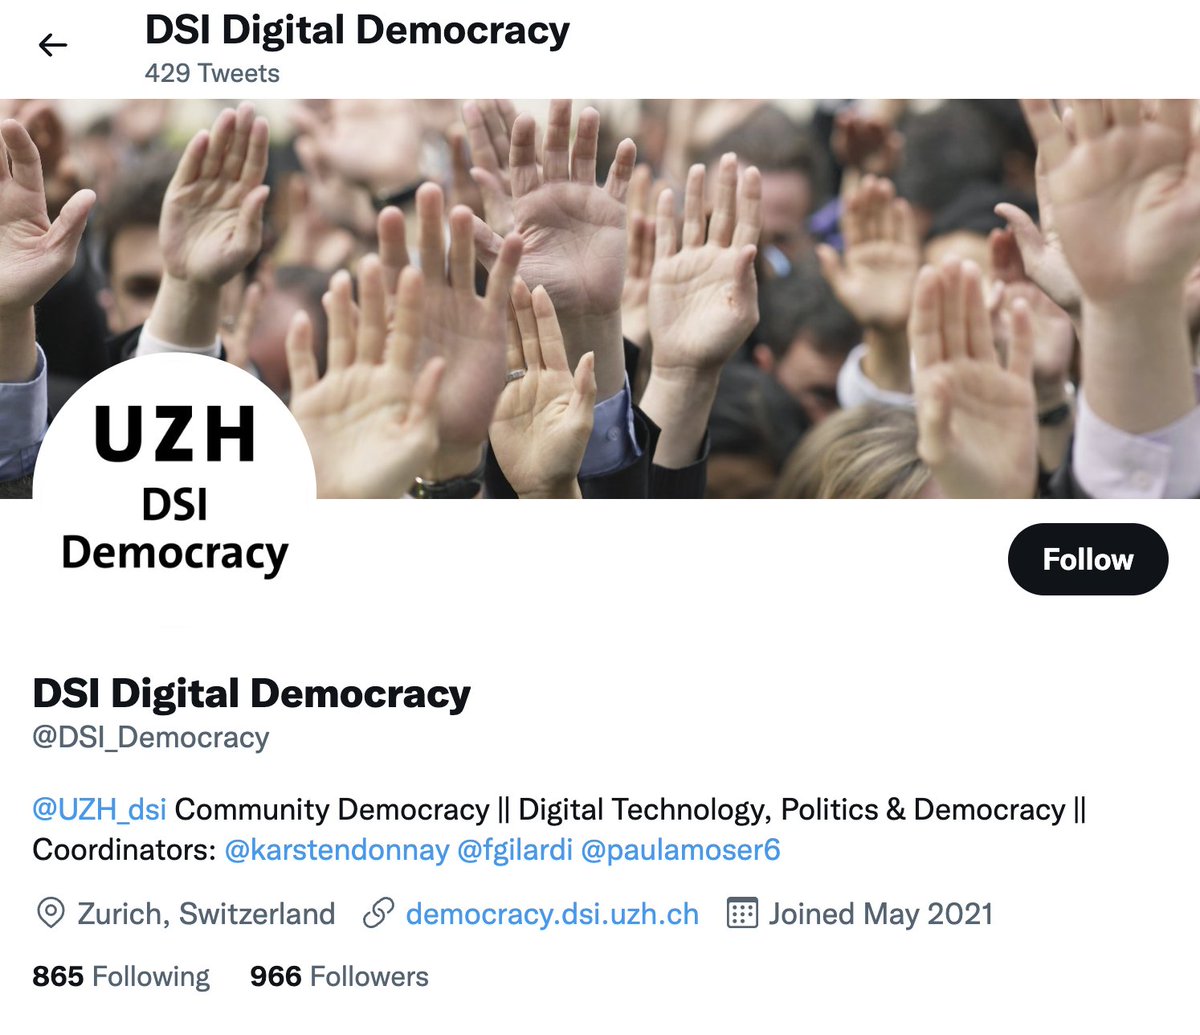 Please help @DSI_Democracy reach 1001 followers by the end of the week -- we're close! (Our reporting is due soon 🤗)